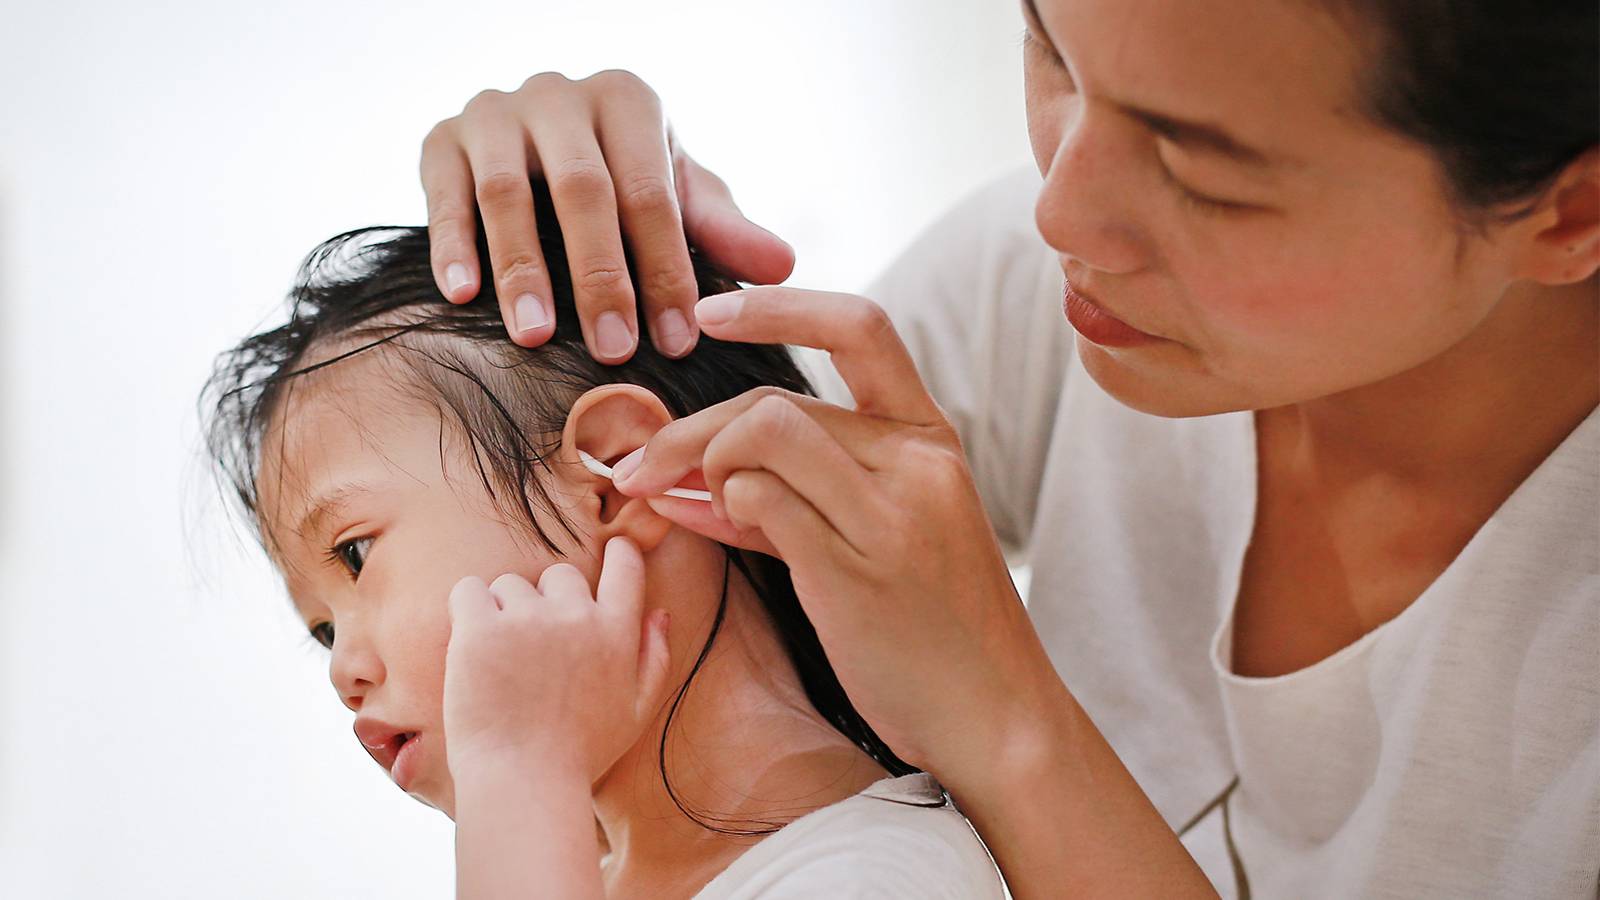 EXPERT ADVICE: Cleaning your totâs ear and earwax